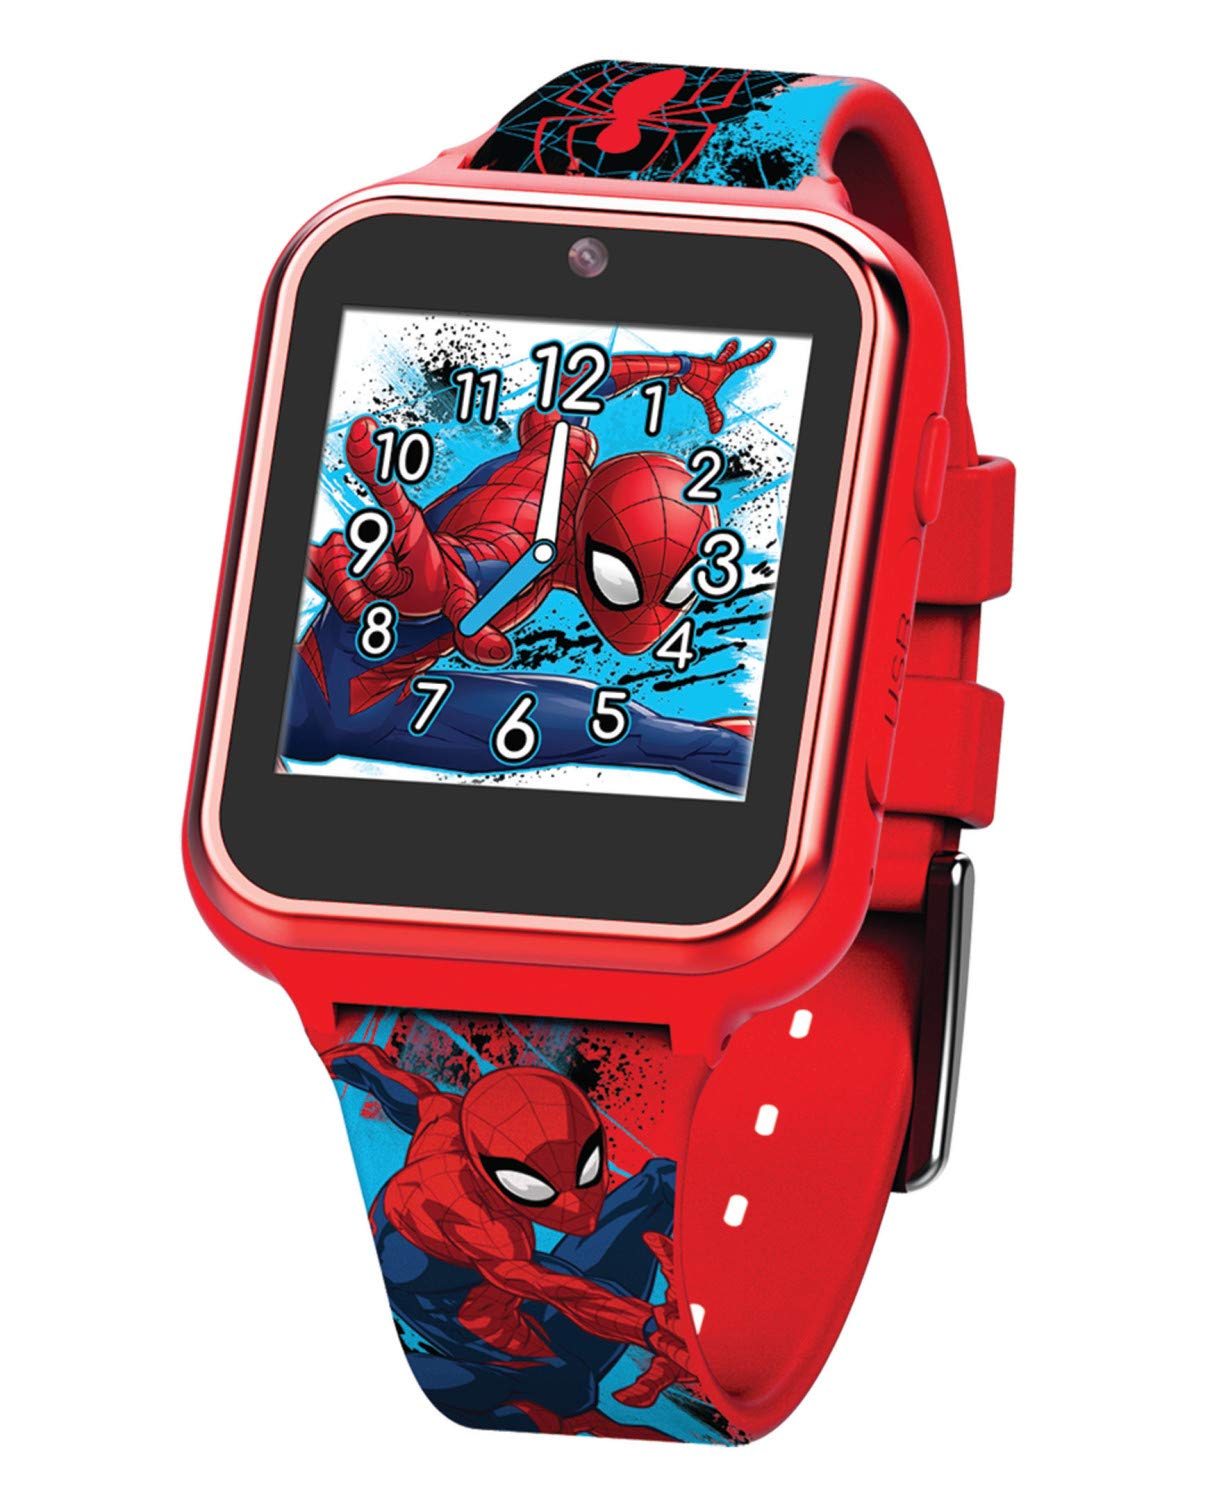 Accutime Marvel Spider-Man Red Educational Touchscreen Smart Watch Toy for Boys Girls Toddlers - Selfie Cam Learning Games